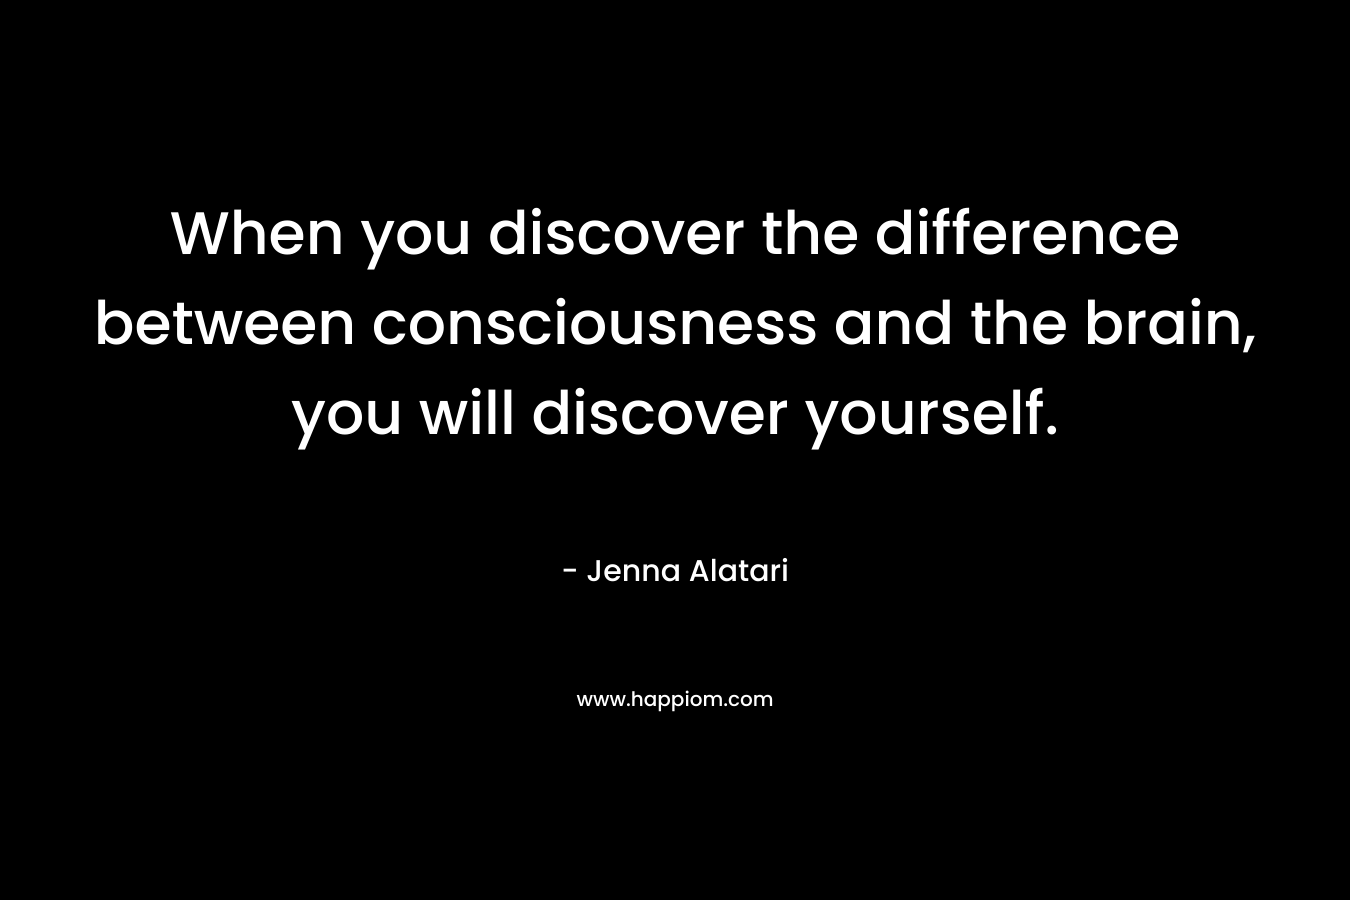 When you discover the difference between consciousness and the brain, you will discover yourself.